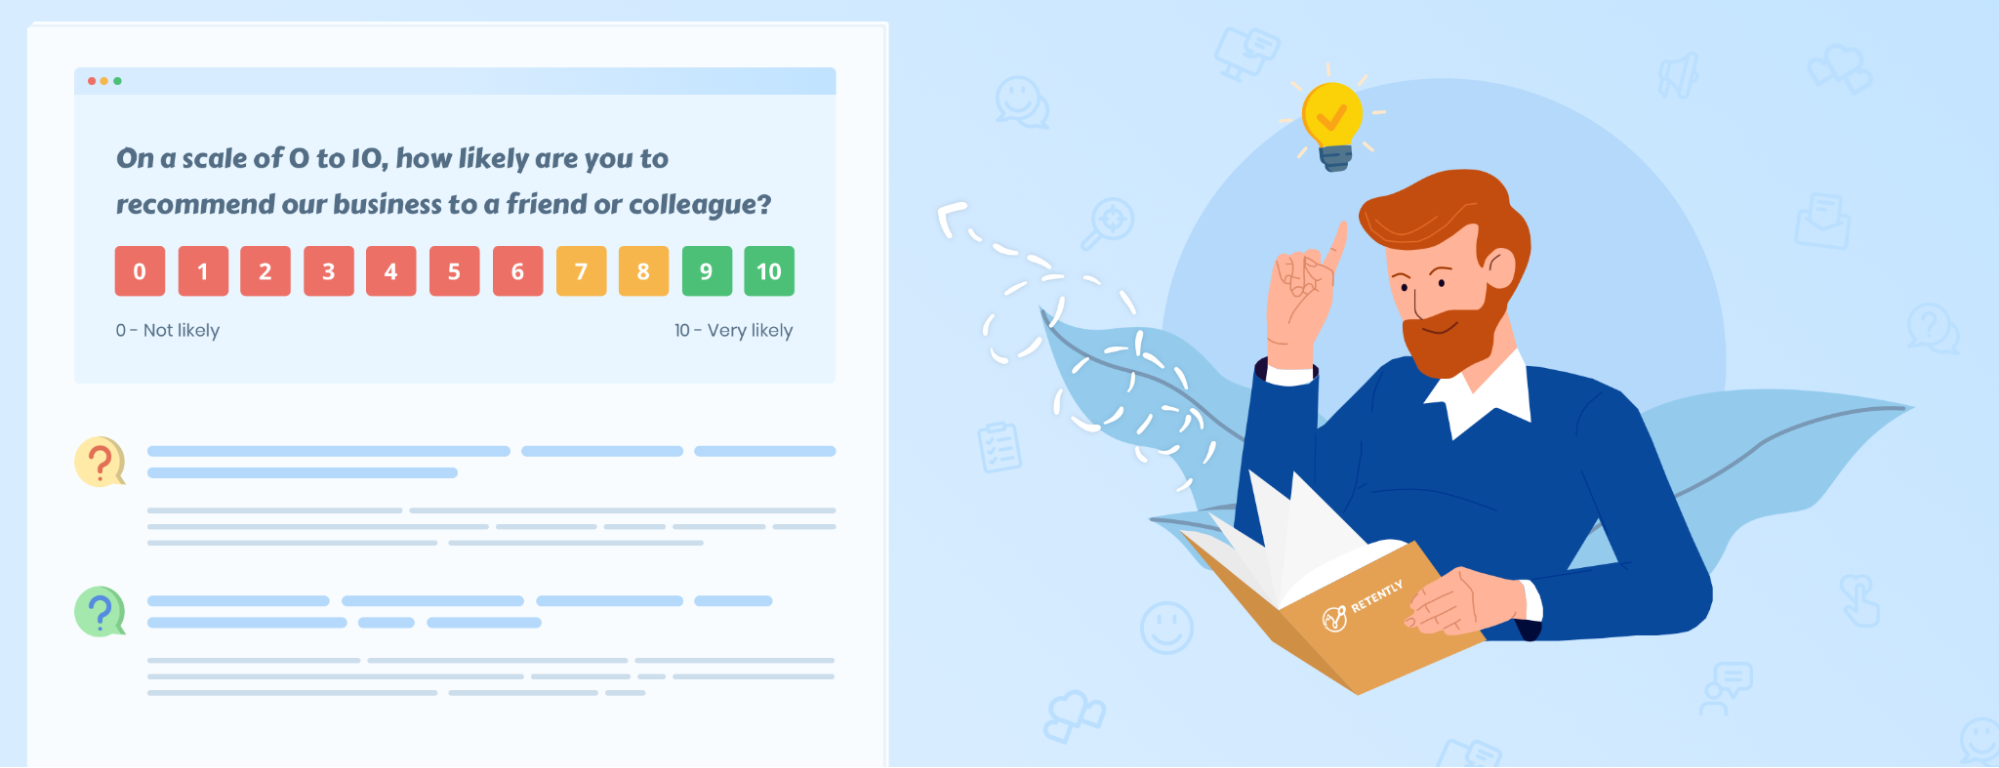 Good Survey Questions & Examples—Best Practices & Tips